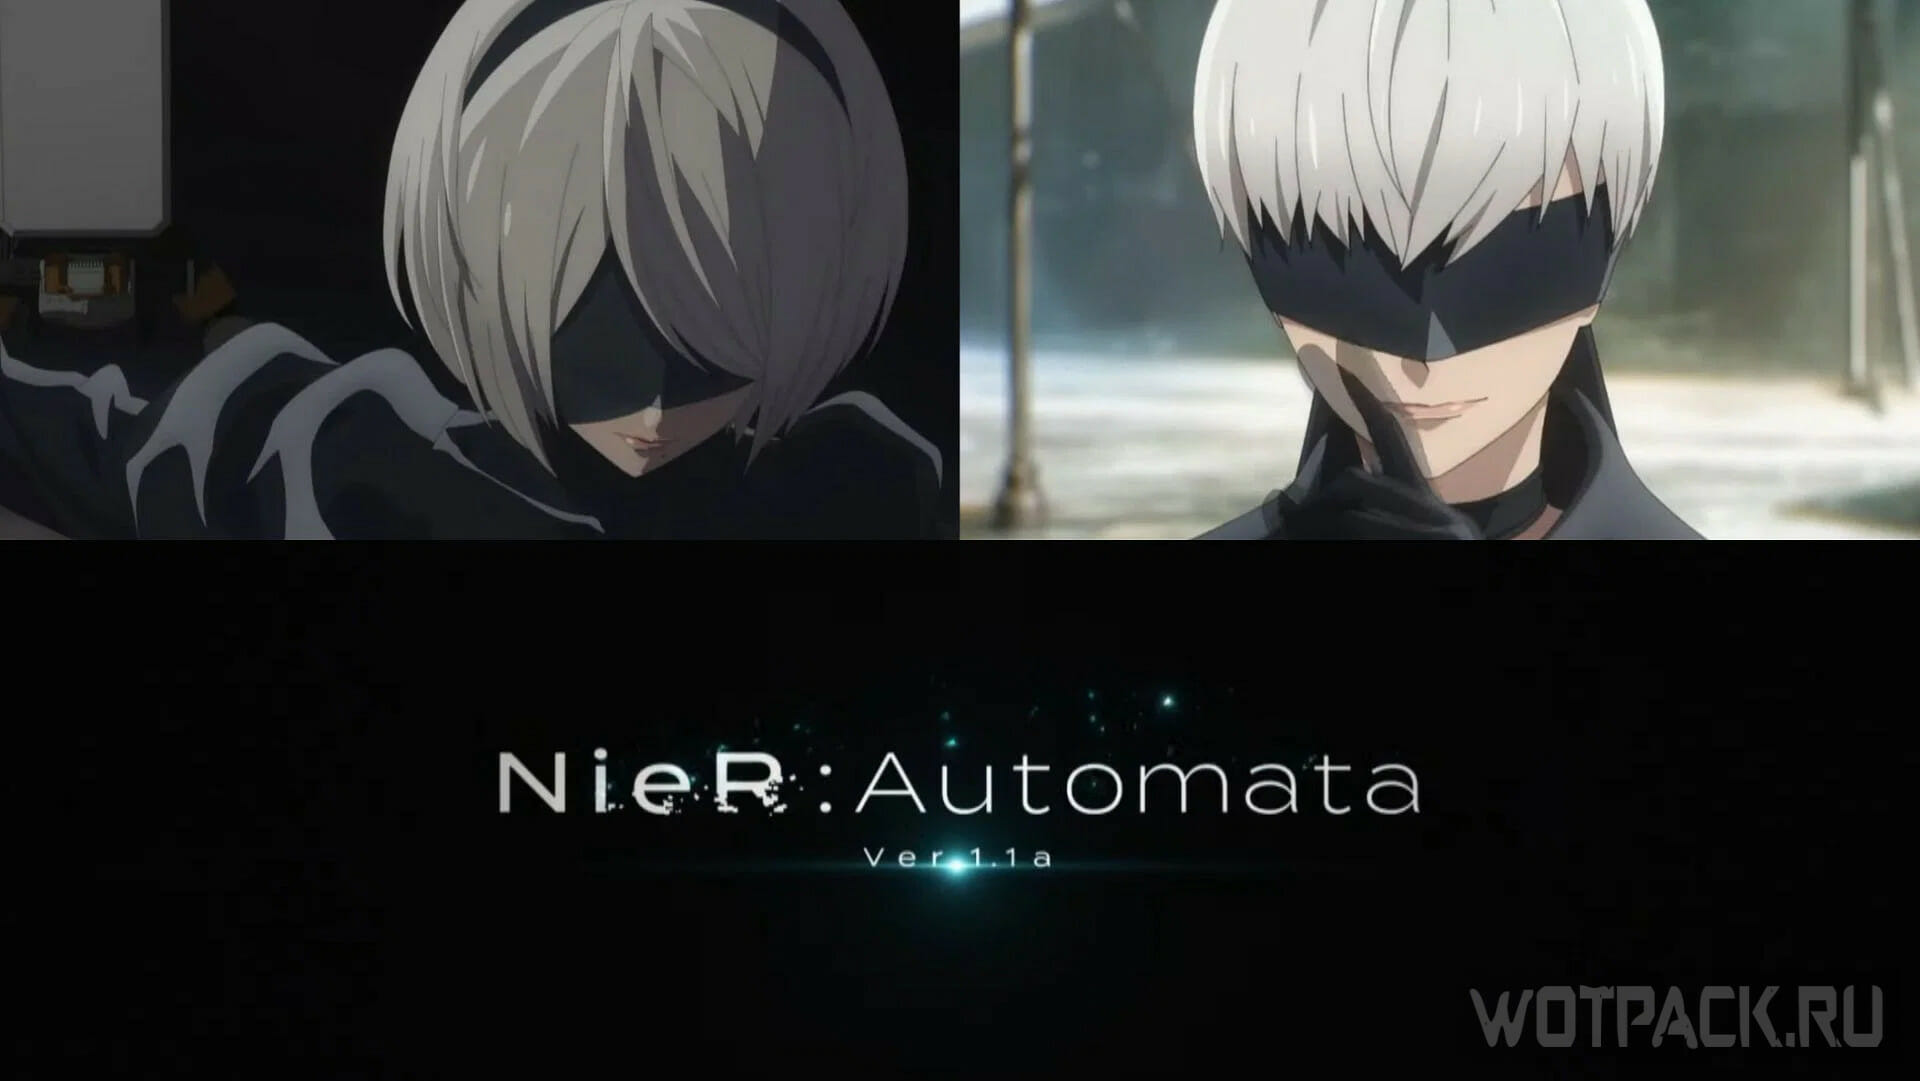 NieR Automata Ver11a episode 3 release date where to watch what to  expect and more